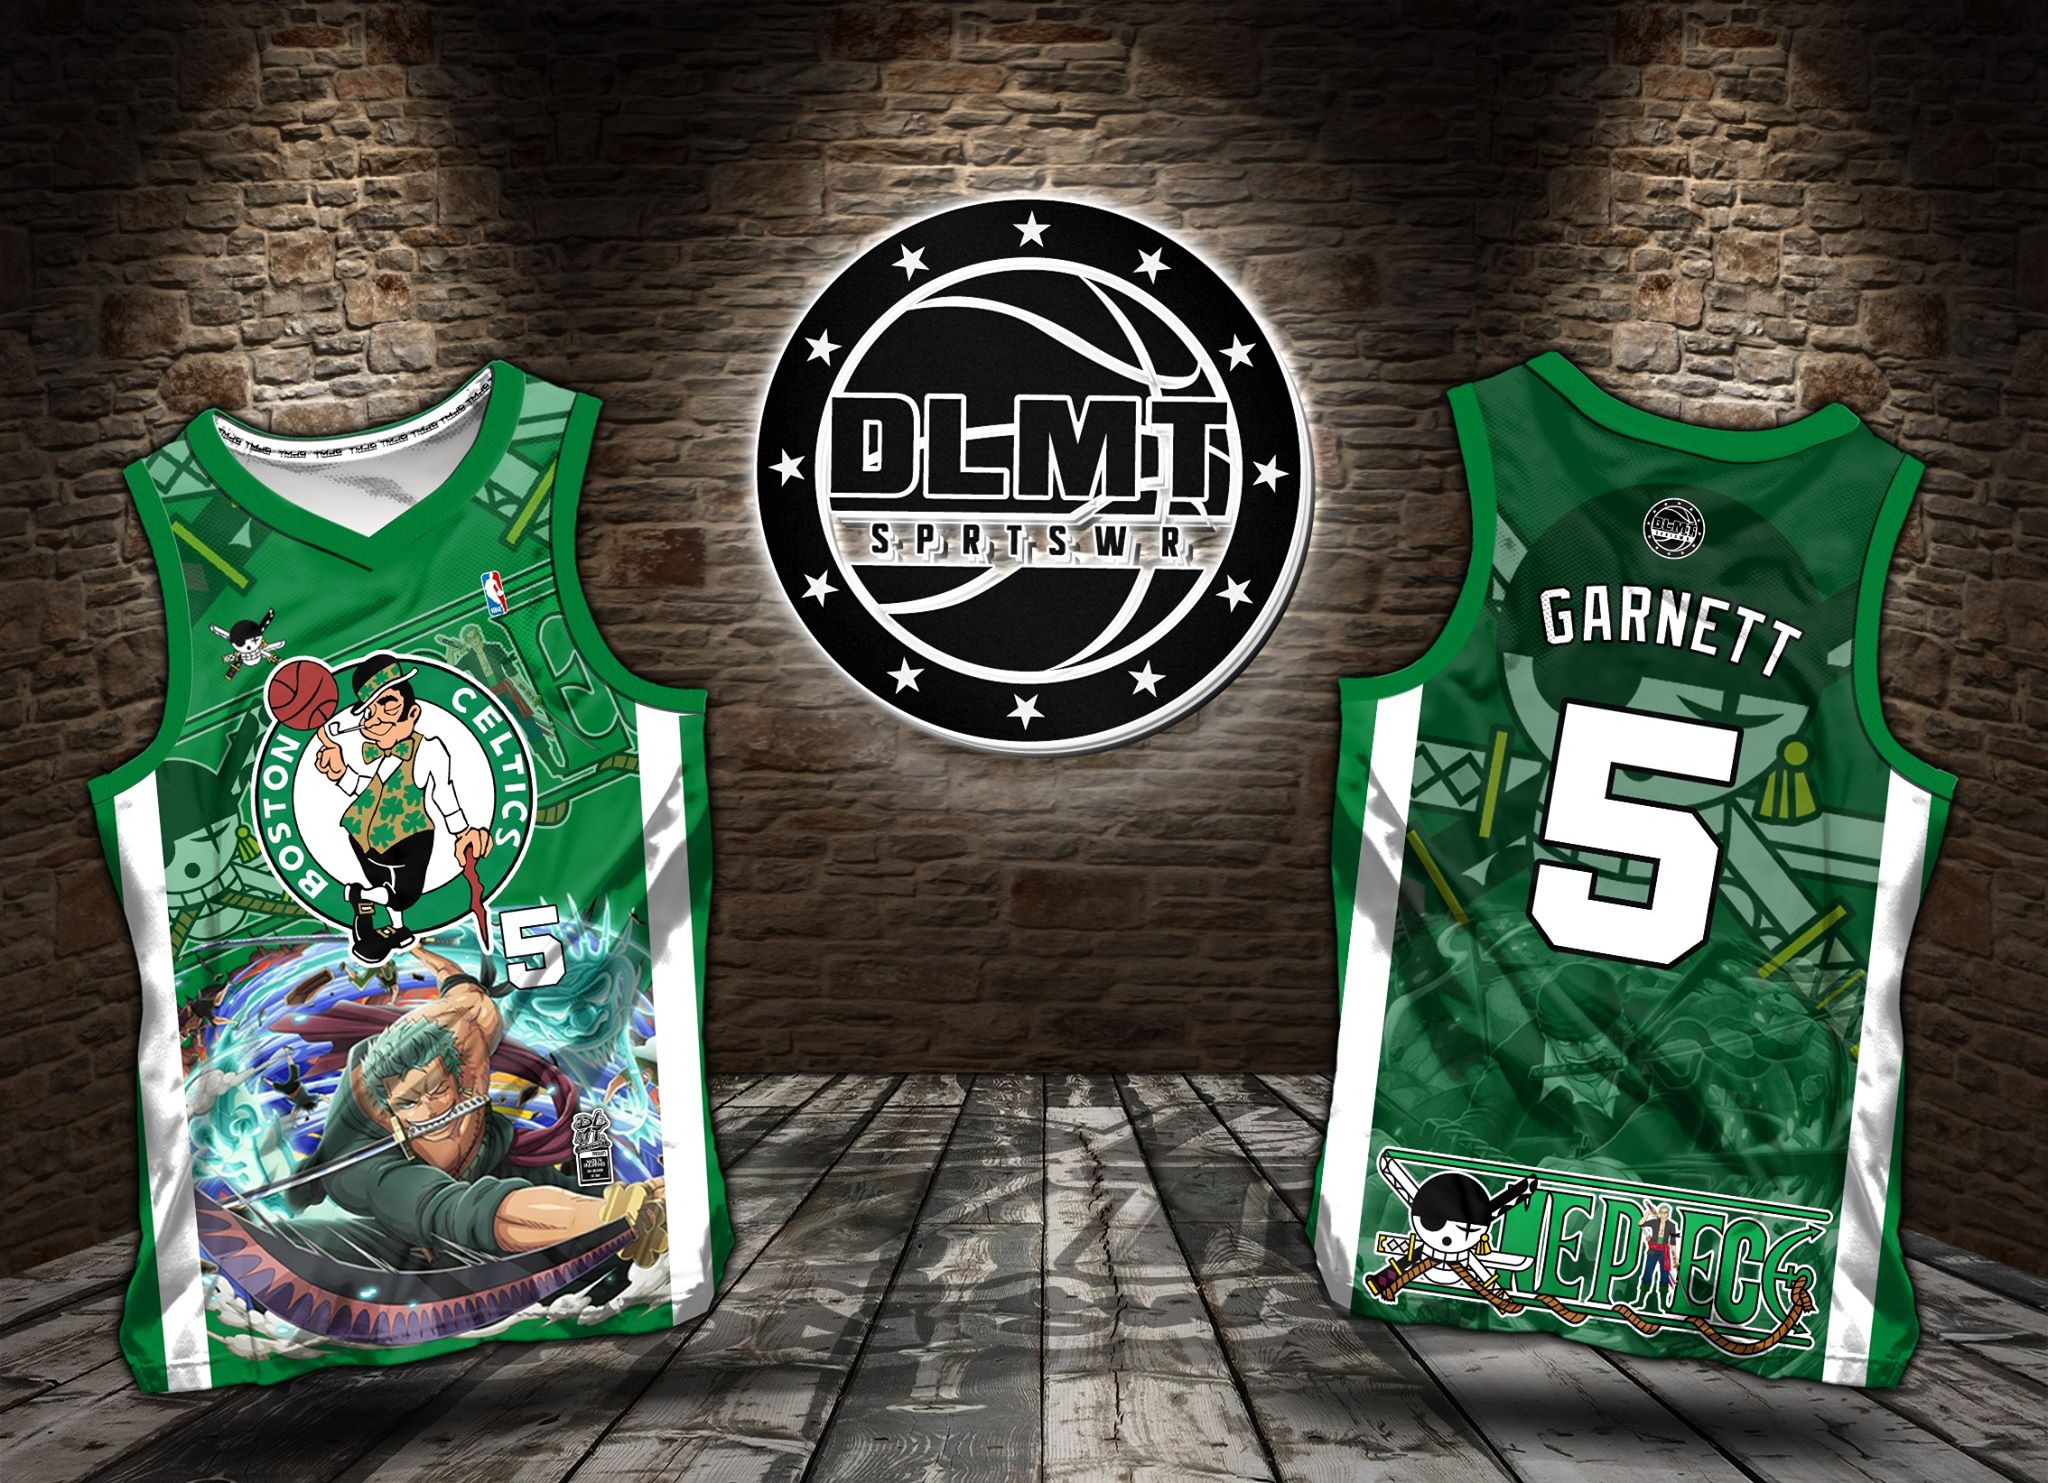 NBA x ONE PIECE - RORONOA ZORO - ANIME CODE DLMT018 FULL SUBLIMATION JERSEY  (FREE CHANGE TEAM NAME, SURNAME & NUMBER)